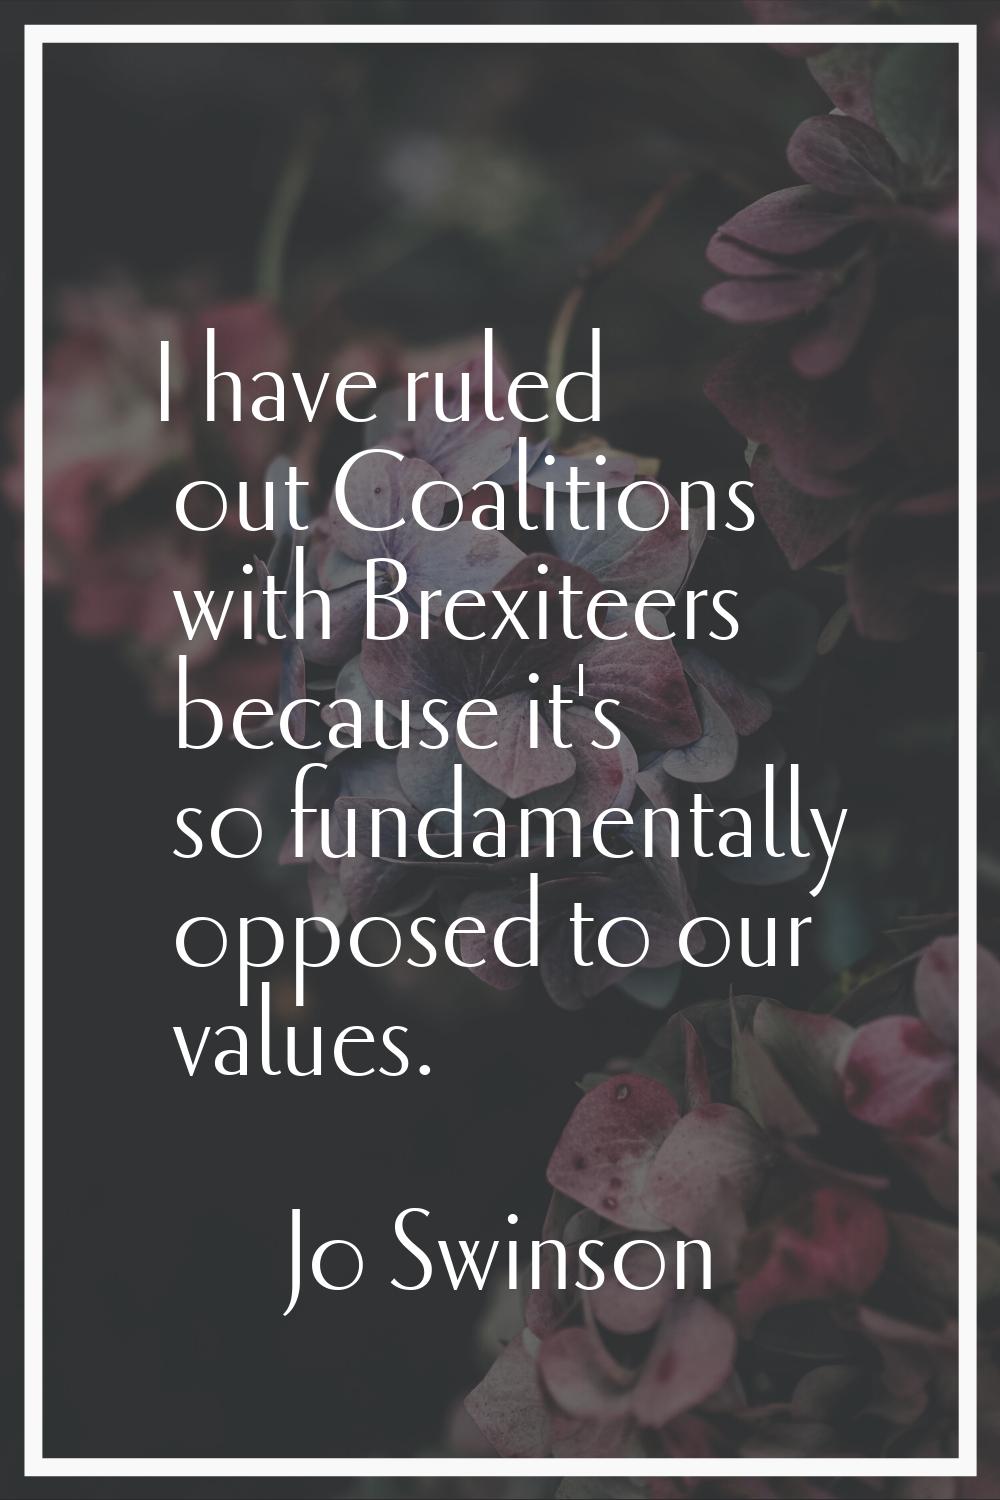 I have ruled out Coalitions with Brexiteers because it's so fundamentally opposed to our values.